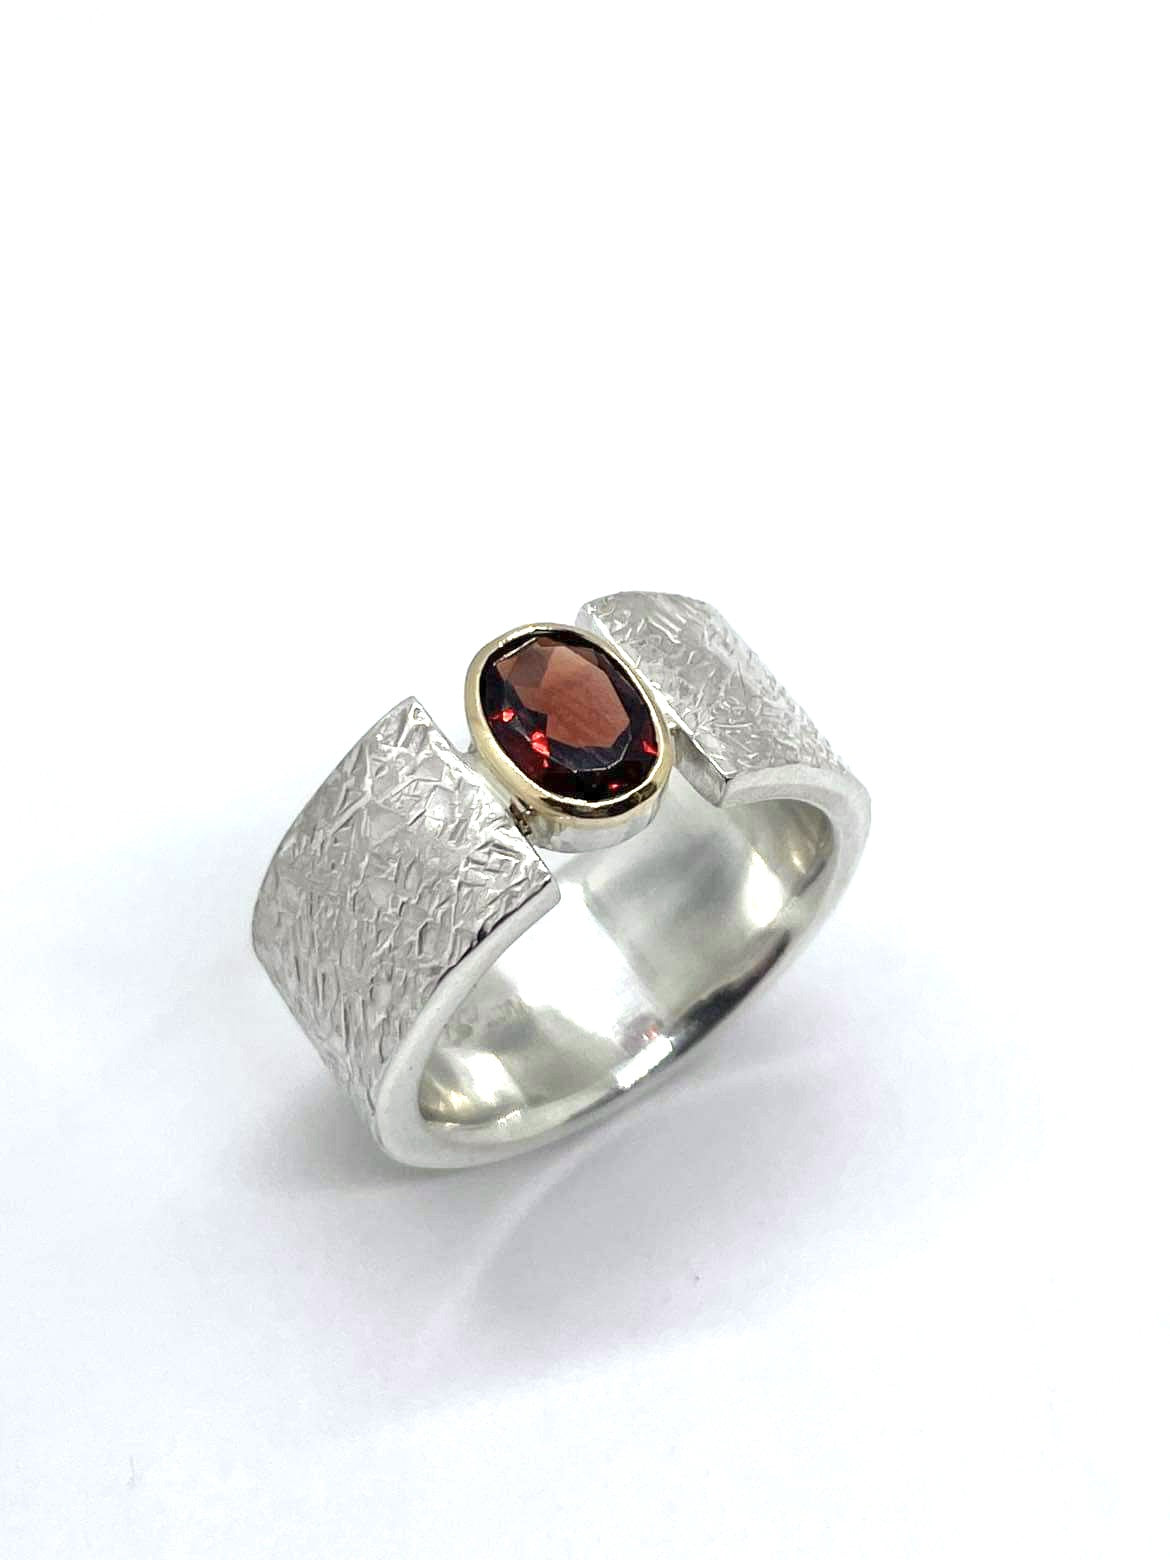 Garnet, 18ct, textured silver wide band ring